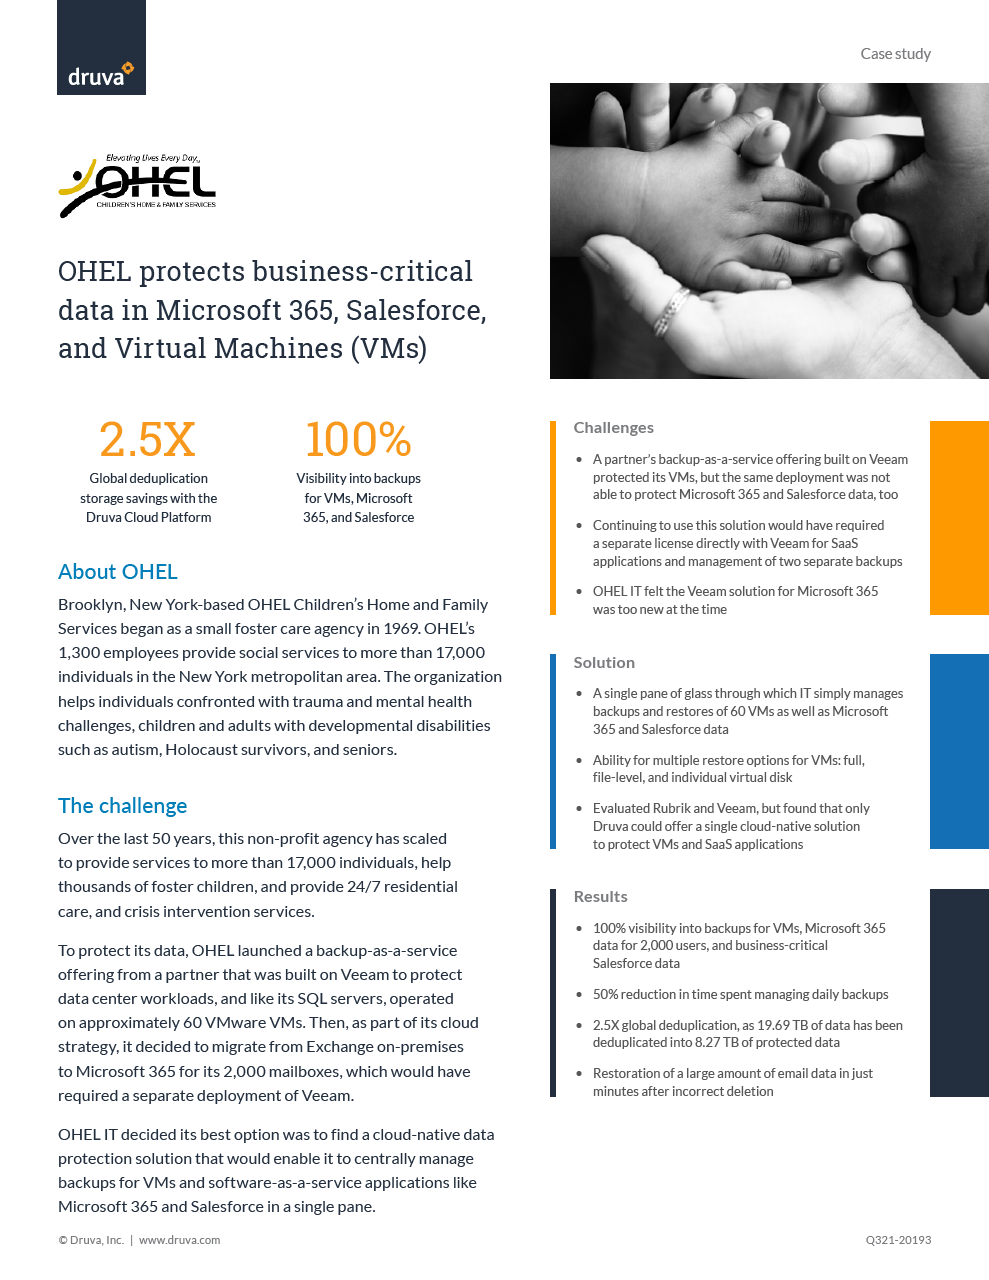 OHEL protects business-critical data in Microsoft 365, Salesforce, and Virtual Machines (VMs) with Druva